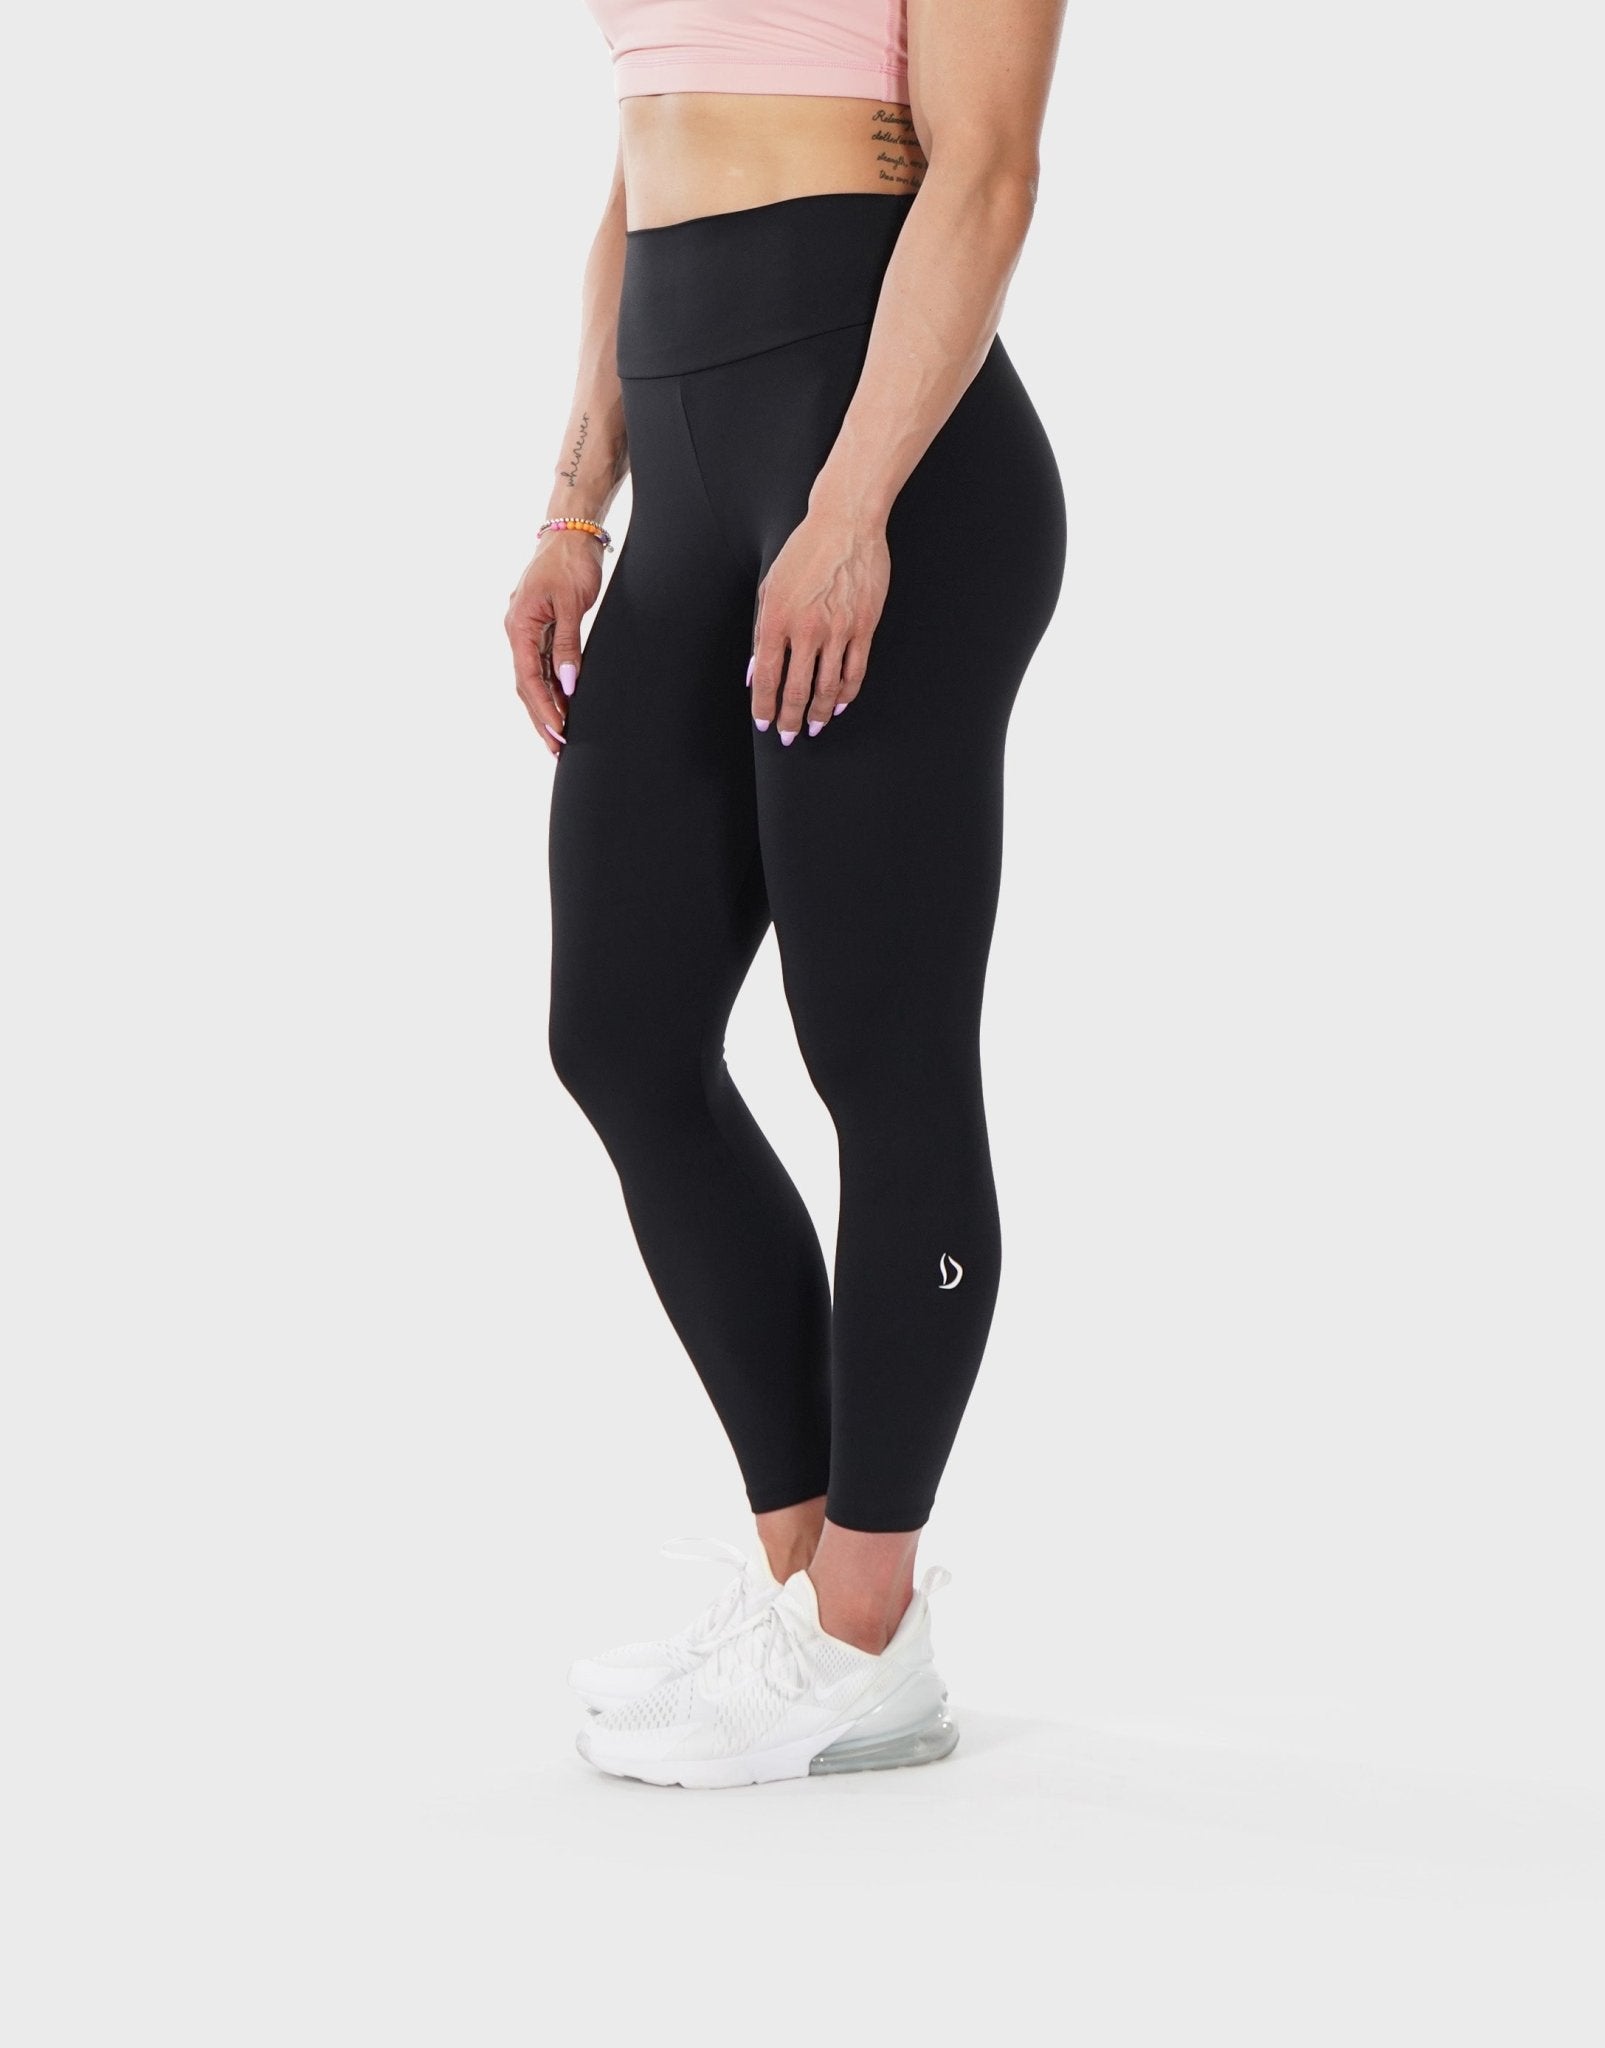 Just Dropped: New 🔥 Leggings - Yummie